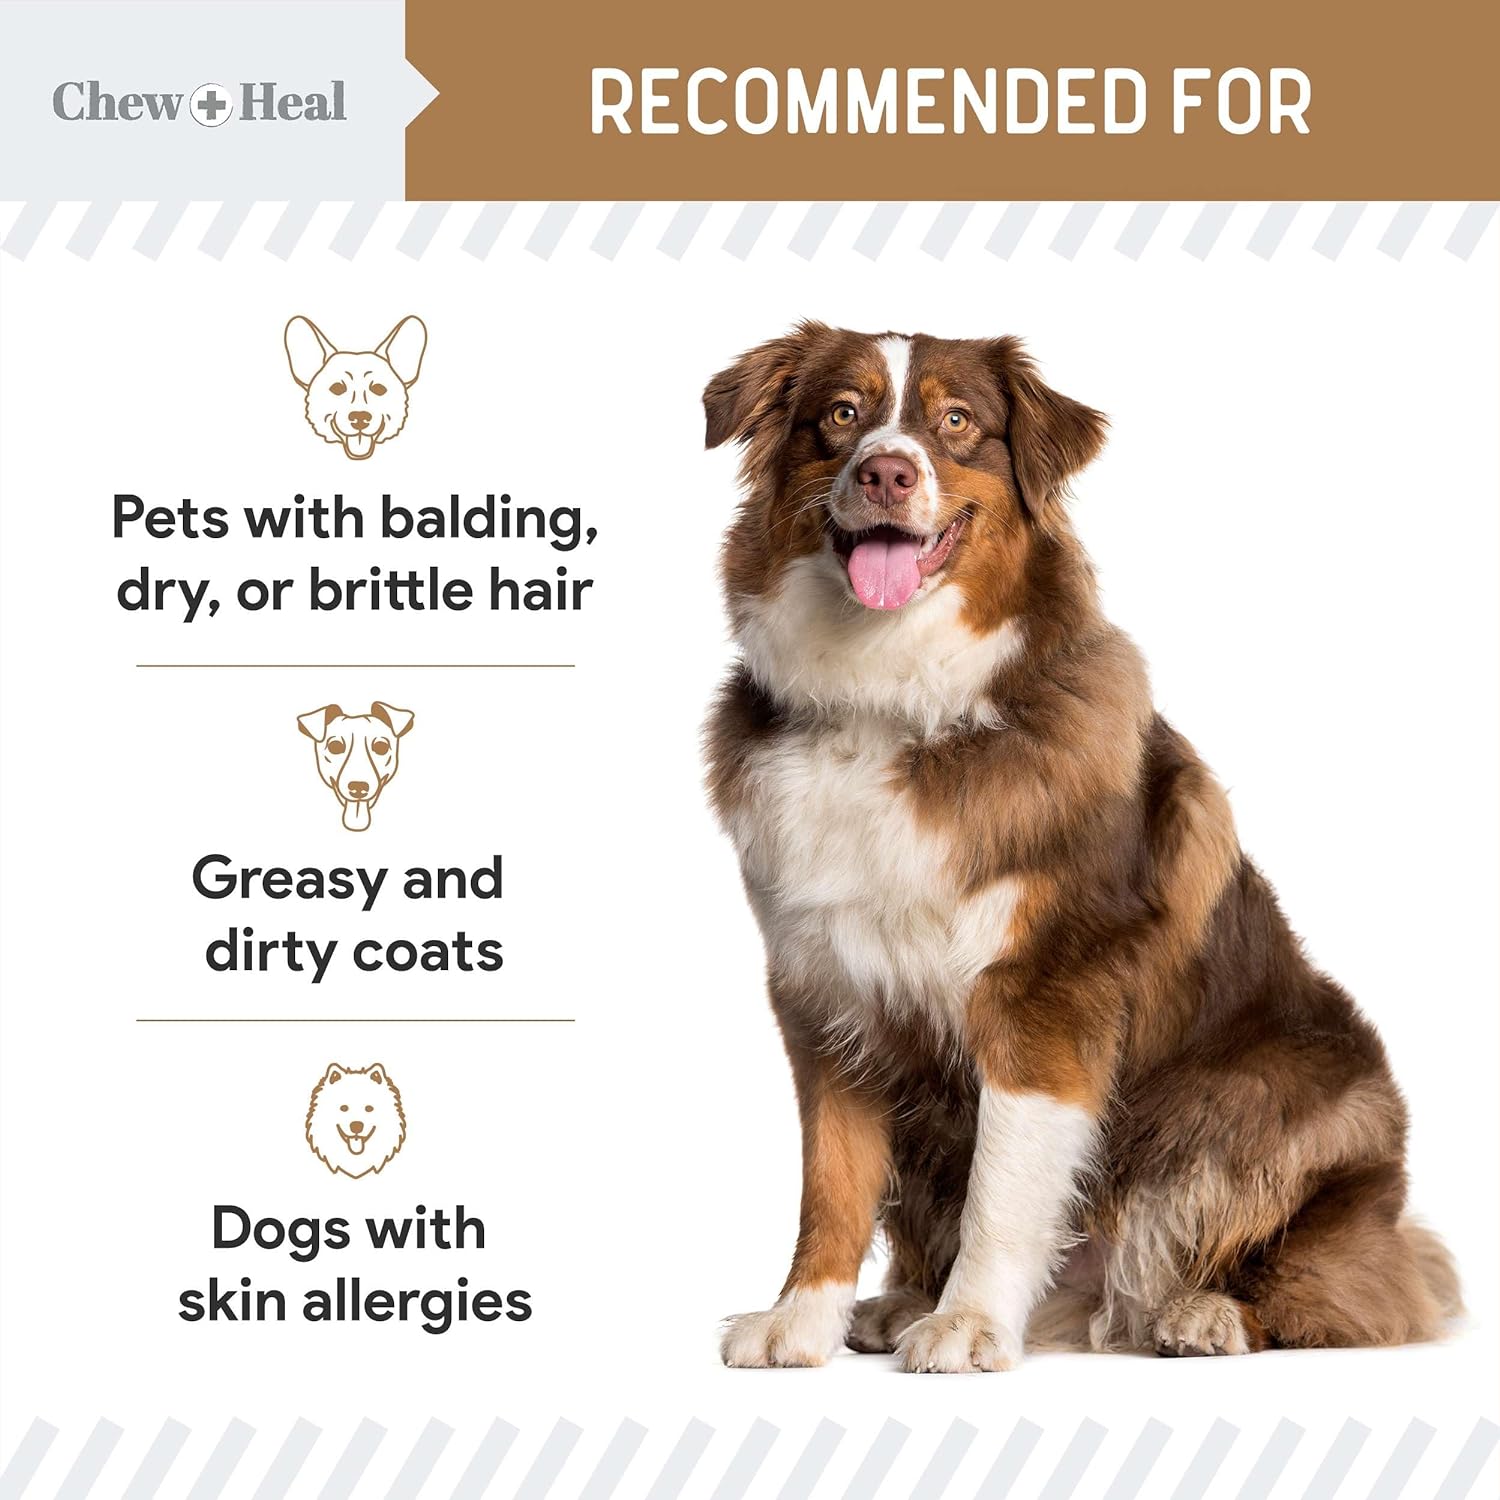 Omega for Dogs - 180 Delicious Soft Chews - Salmon Oil Treats for Skin and Coat, Itch Relief - Fish Oil Blend of Essential Fatty Acids, Omega 3, 6, and 9, and Vitamins - Peanut Butter Flavor : Pet Supplies